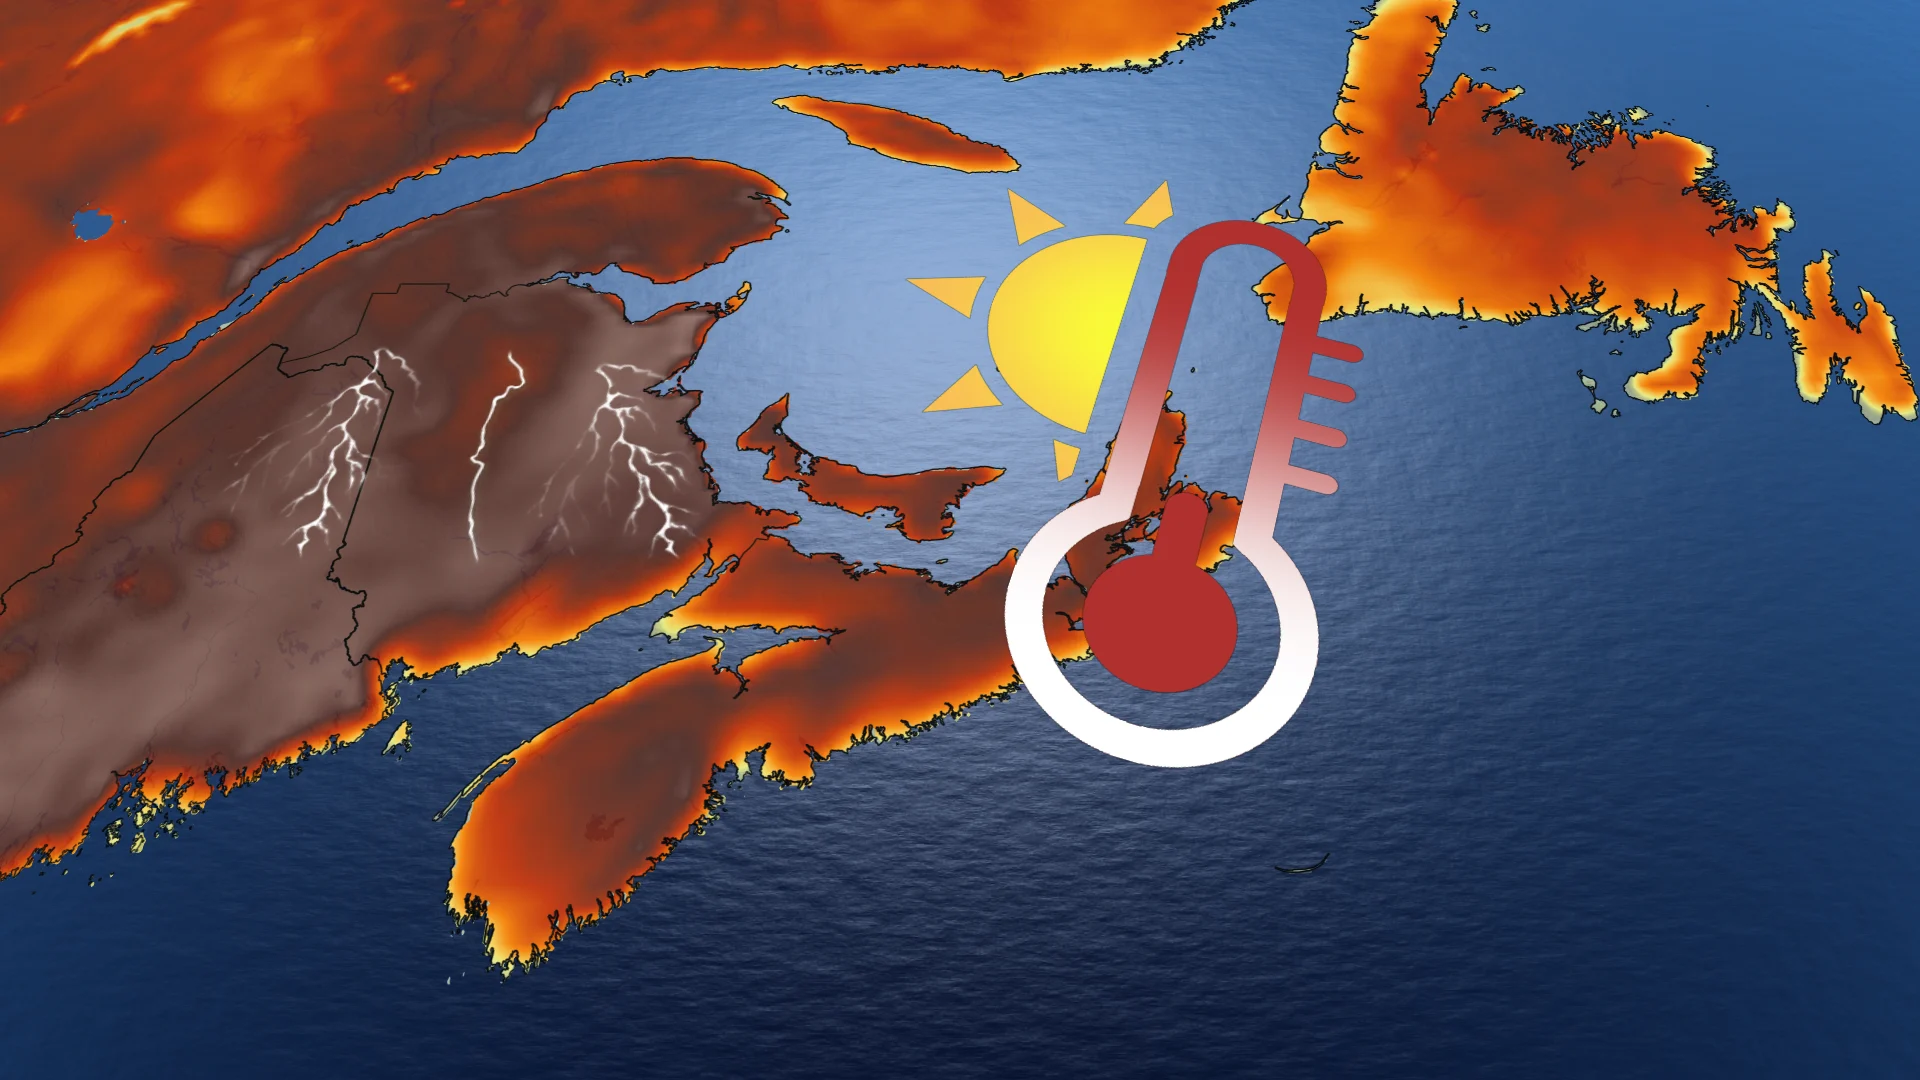 Sweltering heat puts Atlantic Canada records in jeopardy amid health concerns